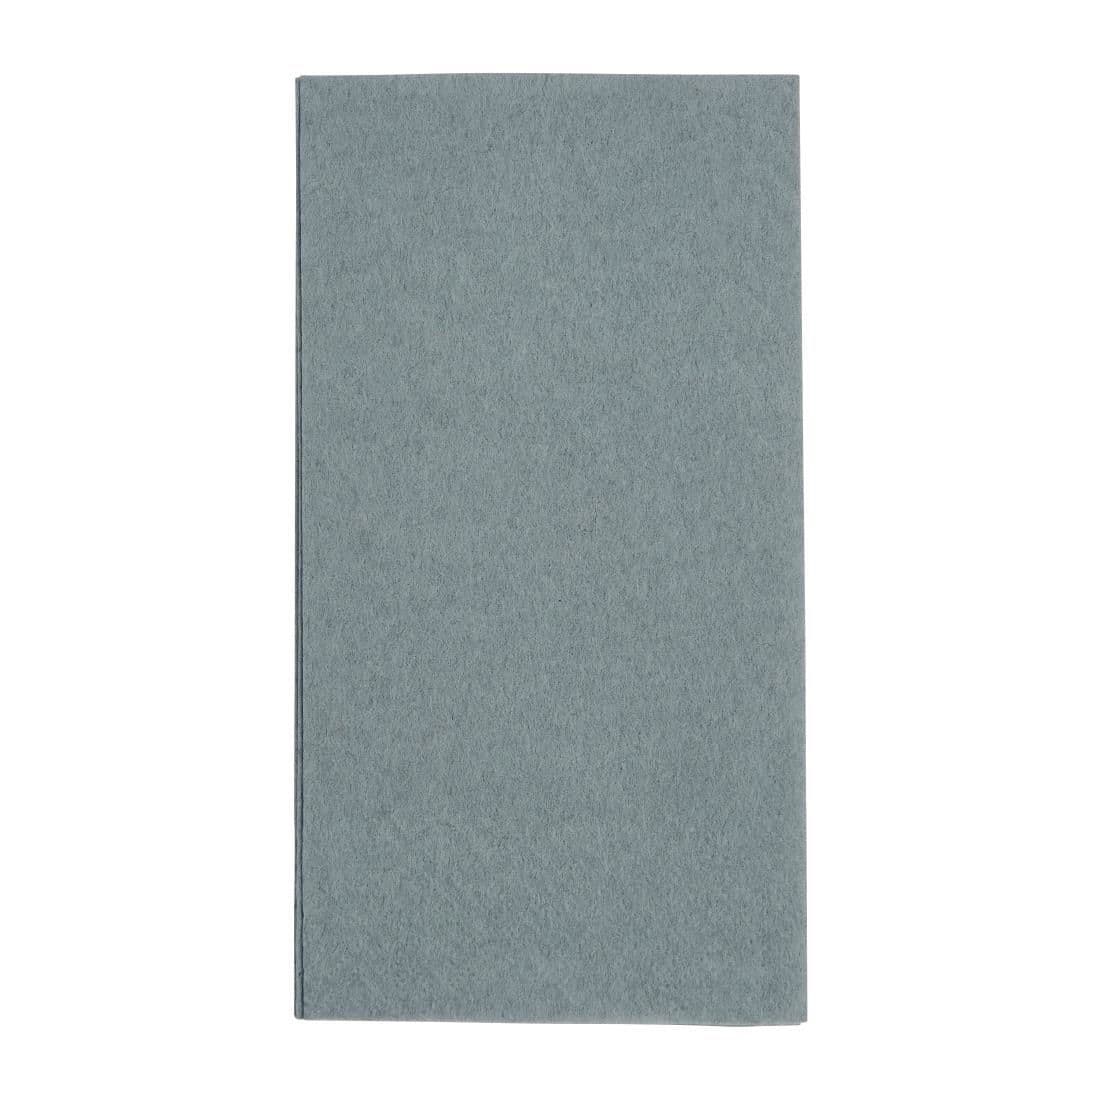 FE231 Fiesta Lunch Napkins Grey 330mm (Pack of 2000) JD Catering Equipment Solutions Ltd